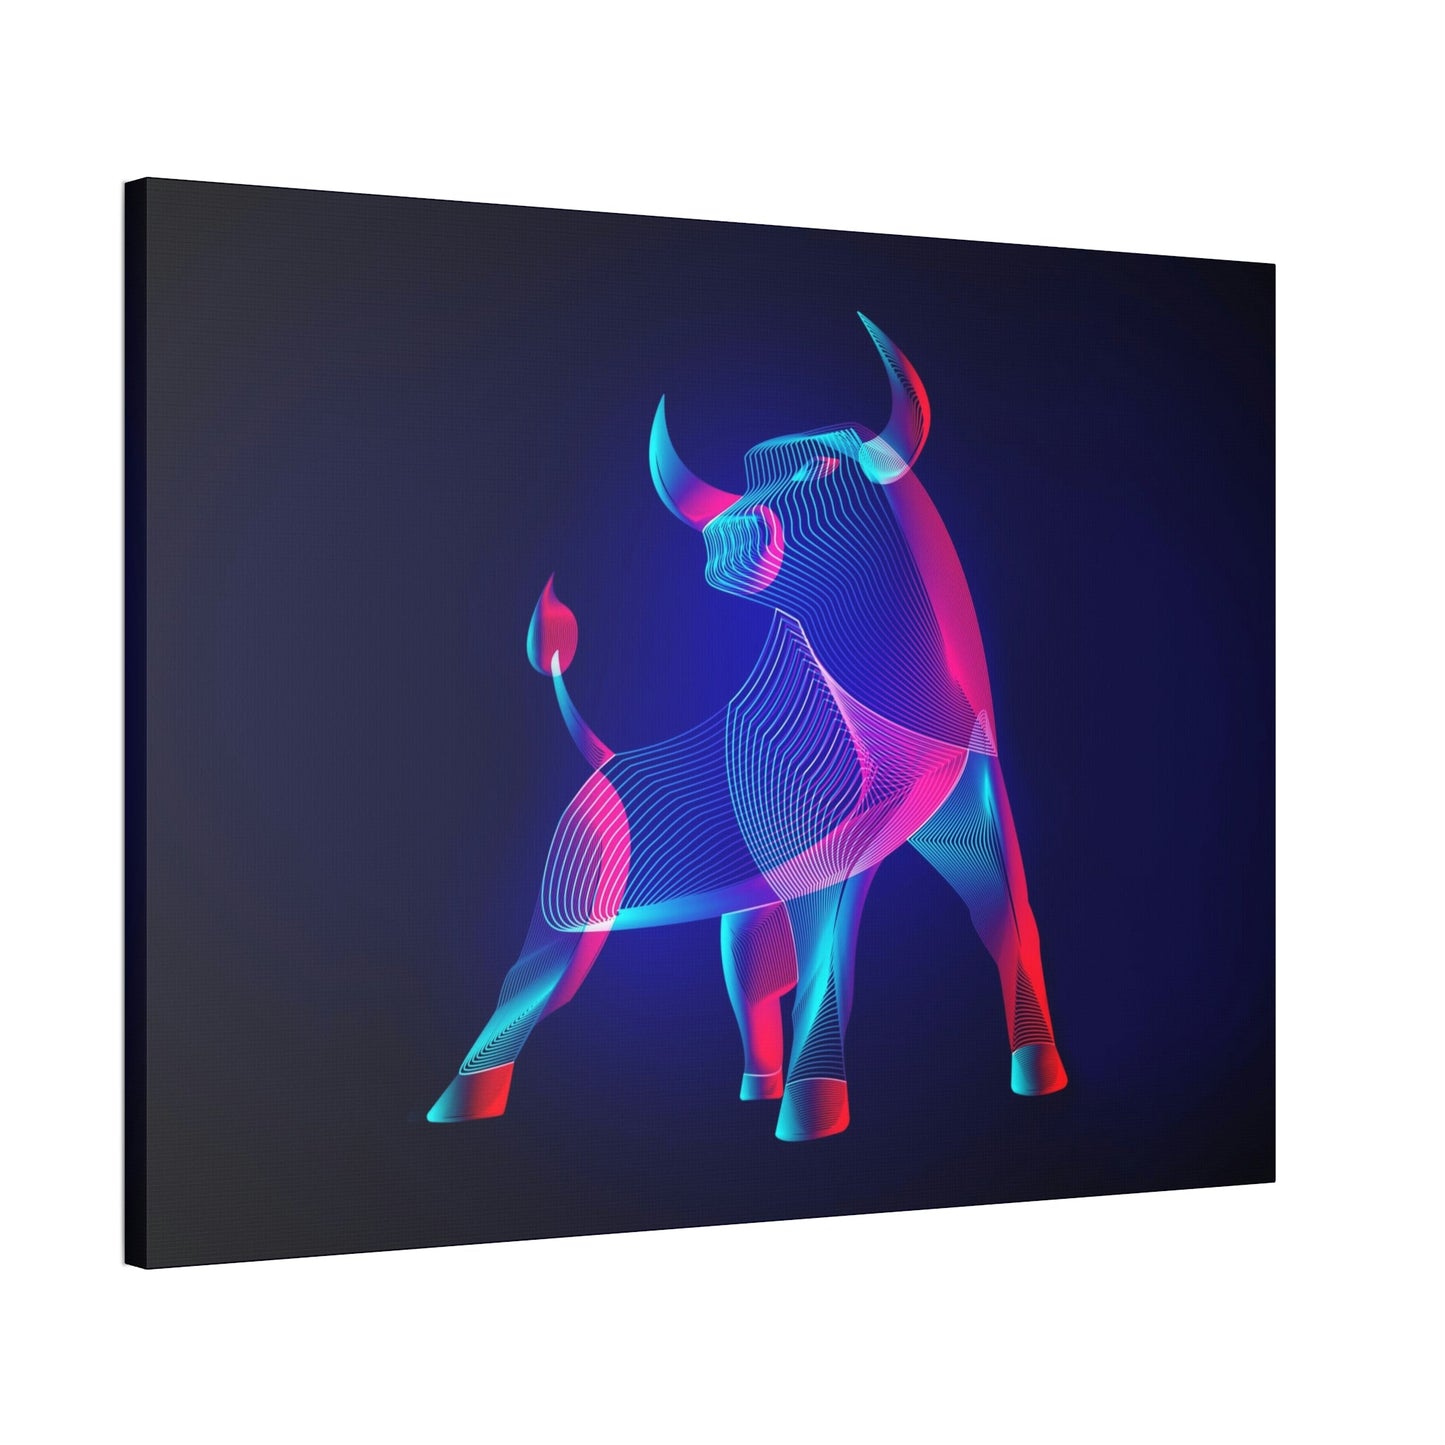 Enchanted Expressions: Premium Canvas Prints for Exquisite Neon-themed Wall Decor